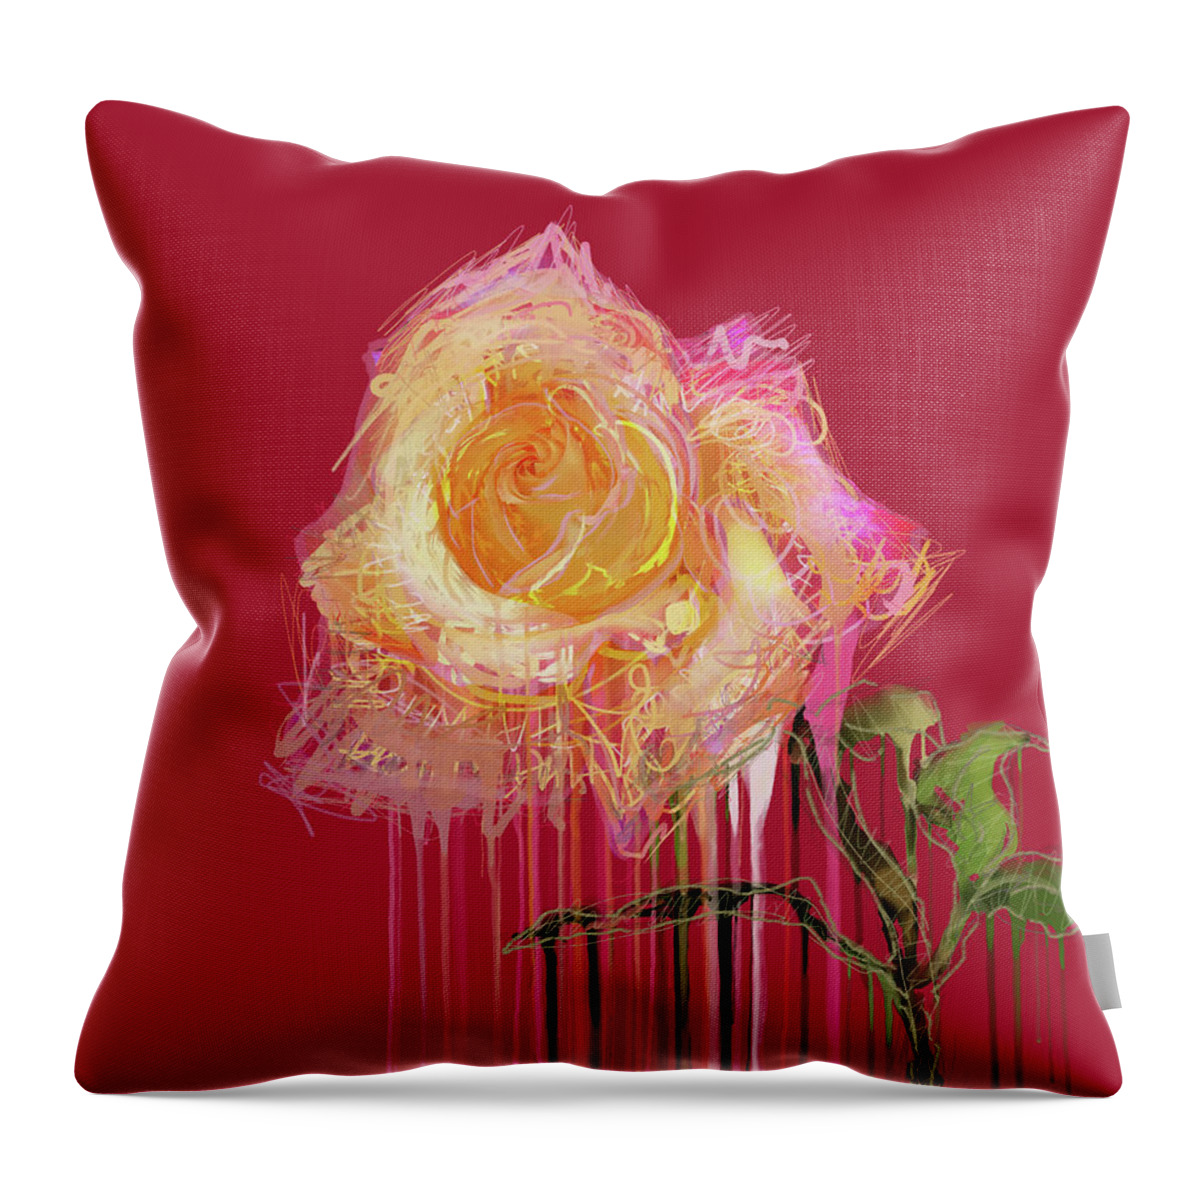 Rose Throw Pillow featuring the mixed media A Rose By Any Other Name - Red by Big Fat Arts